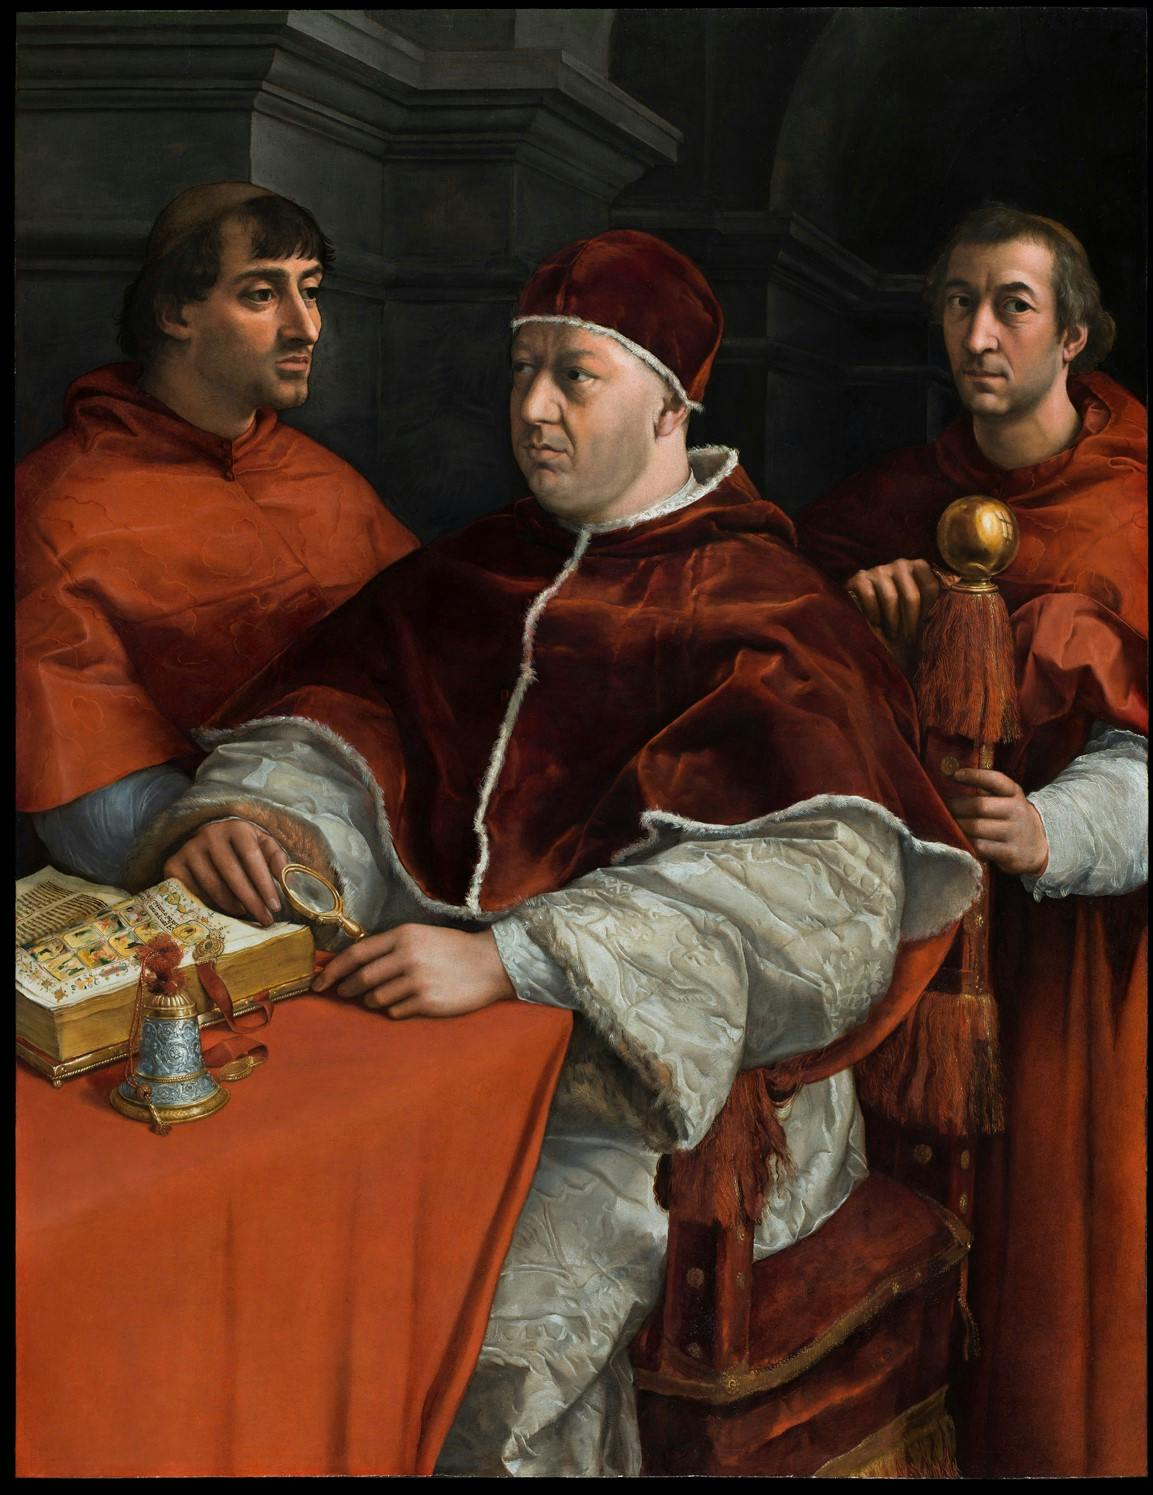 The Medici Pope returns to Florence